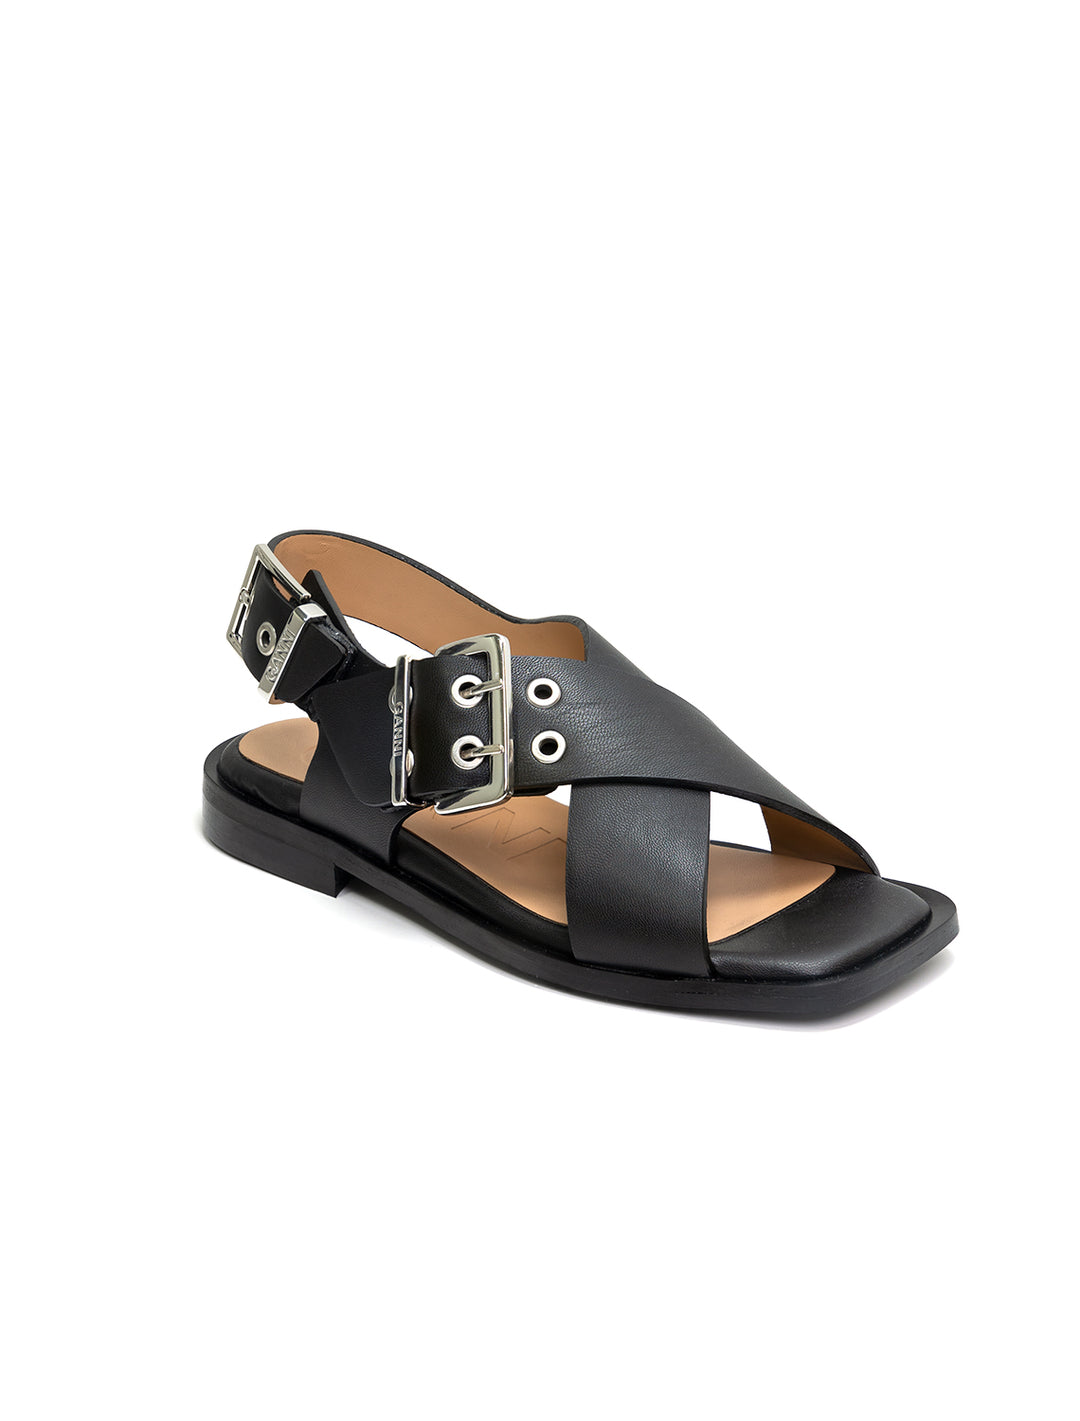 Front angle view of GANNI's black cross strap buckle sandals.